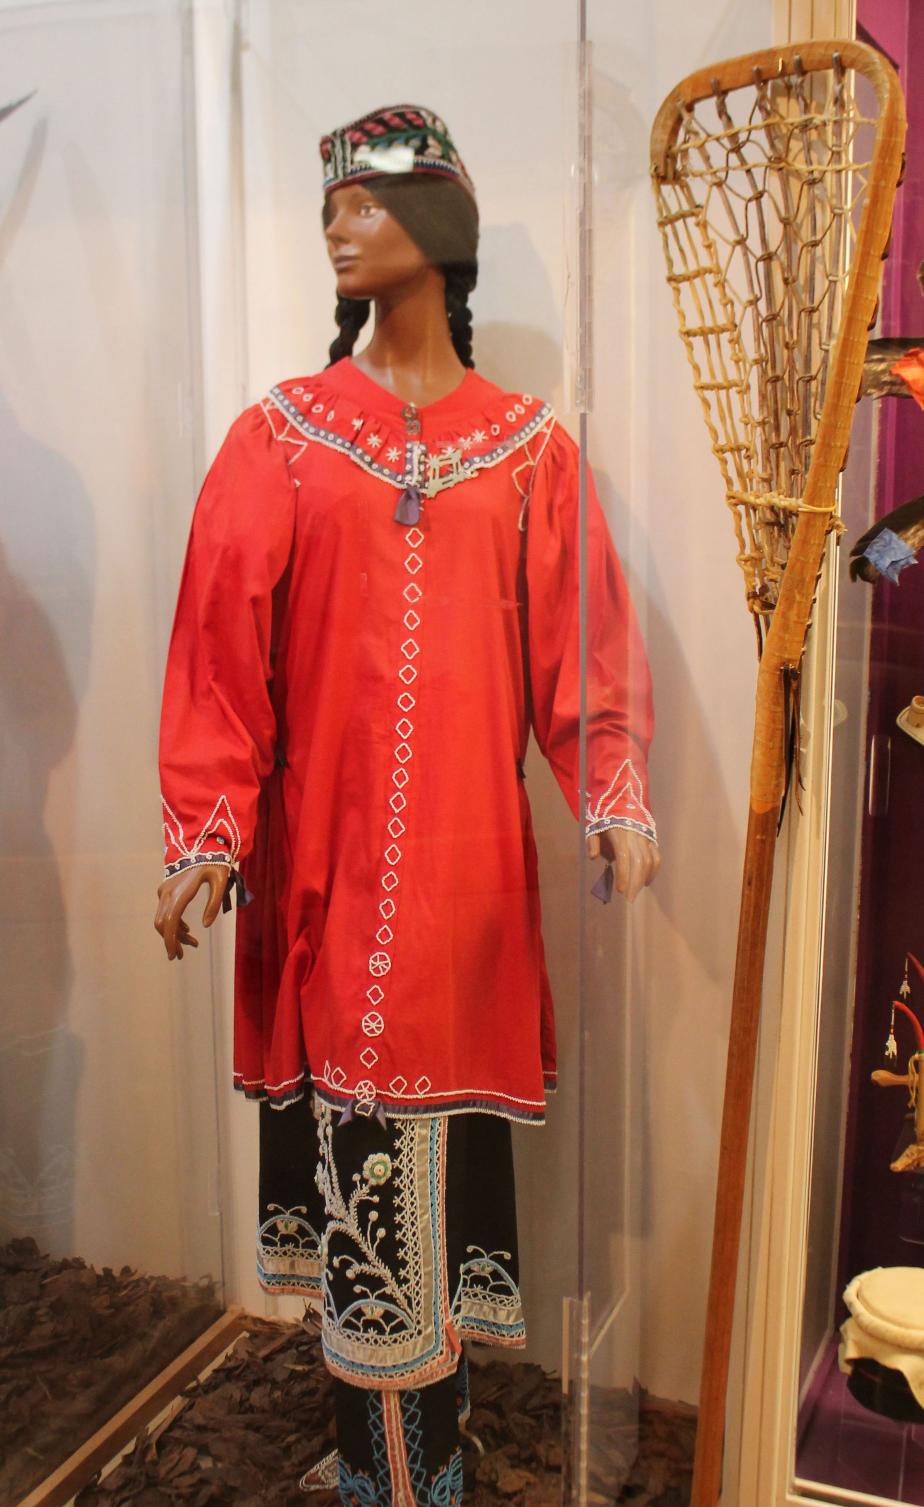 NH Indian Museum - Indian Clothing